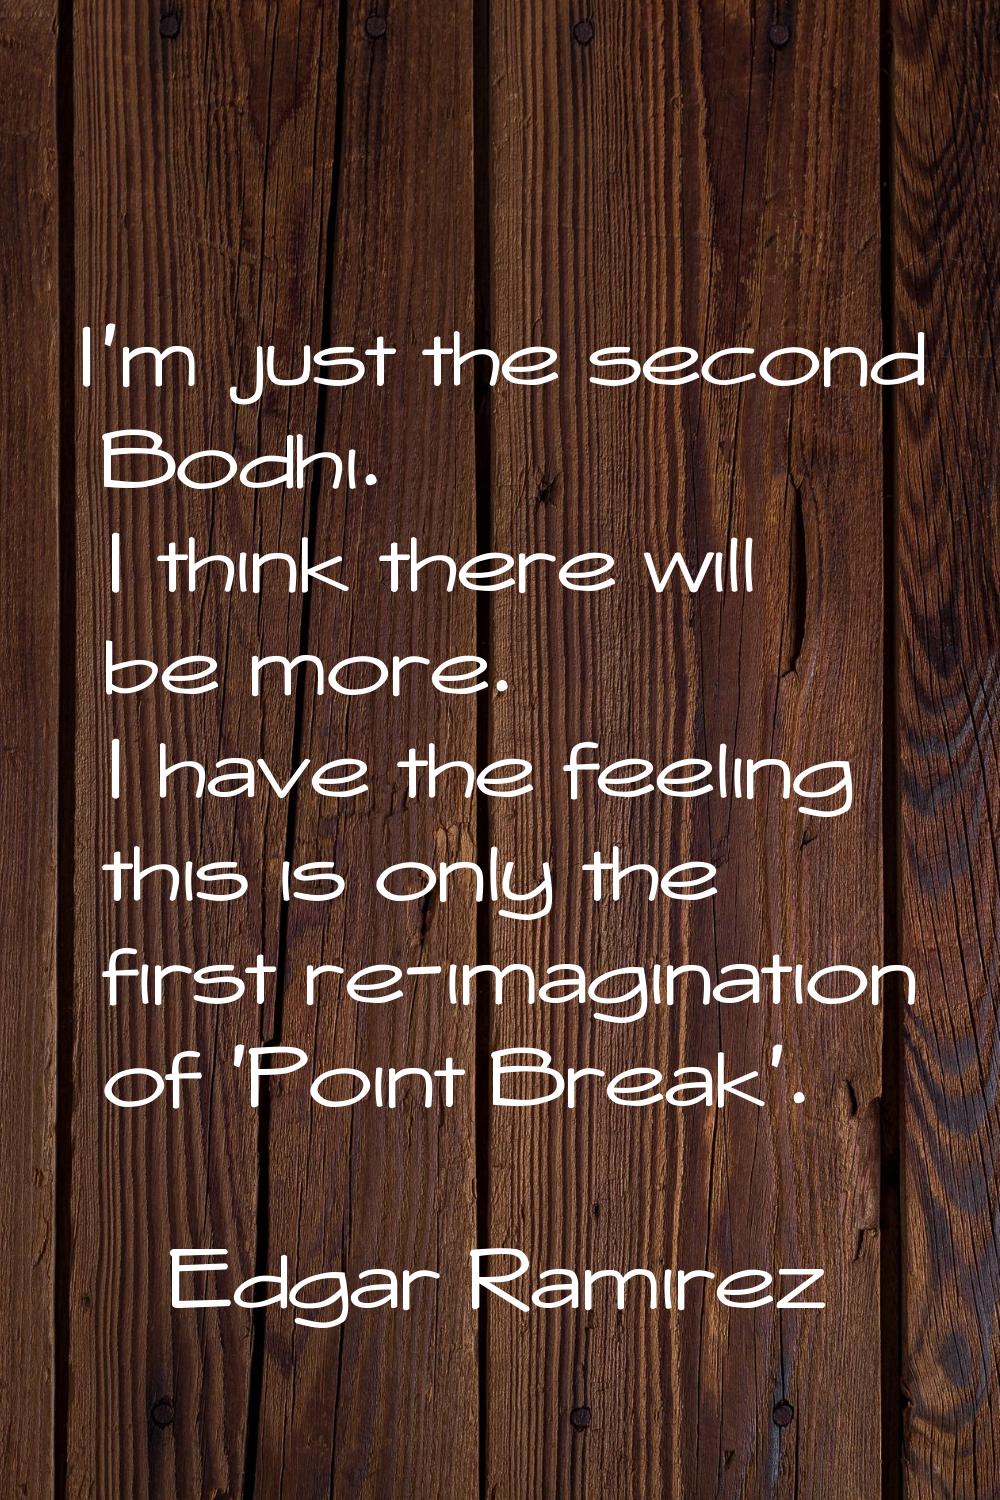 I'm just the second Bodhi. I think there will be more. I have the feeling this is only the first re